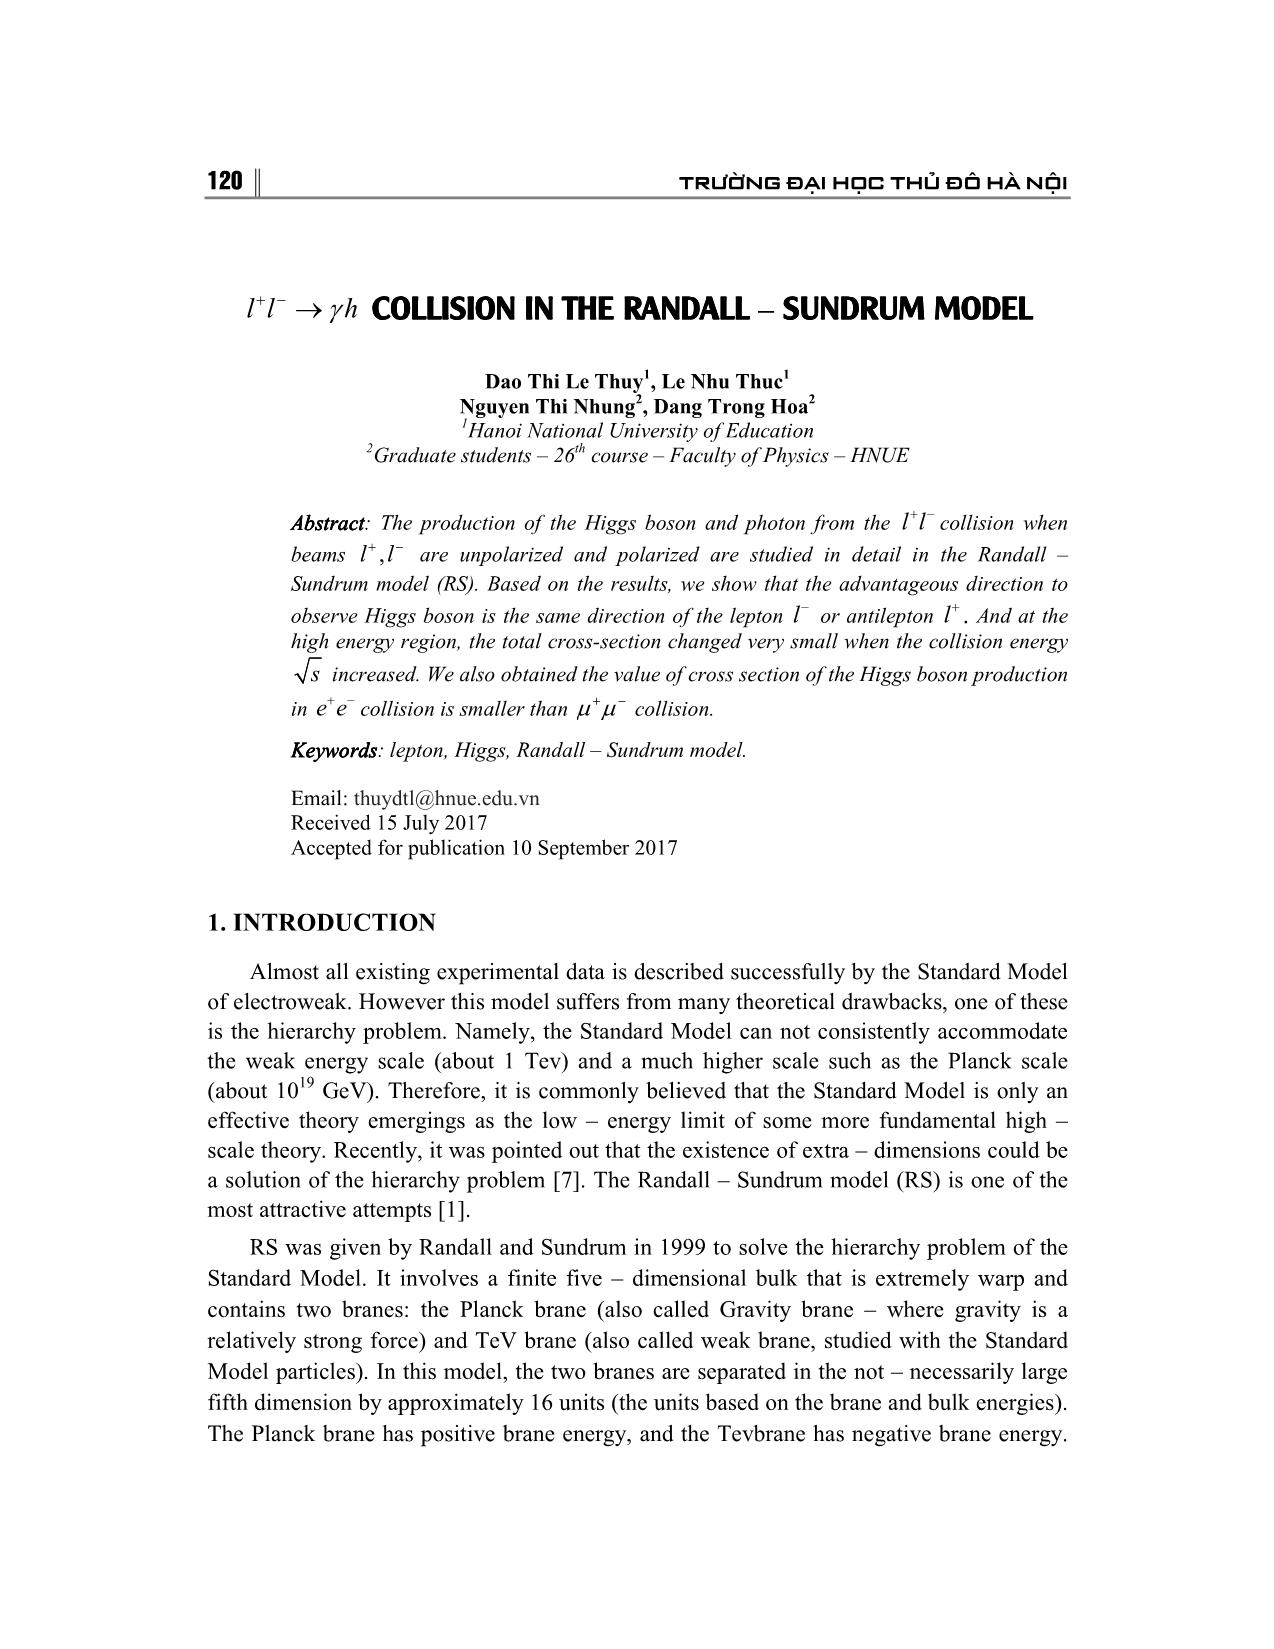 L+l- → γh collision in the randall – sundrum model trang 1